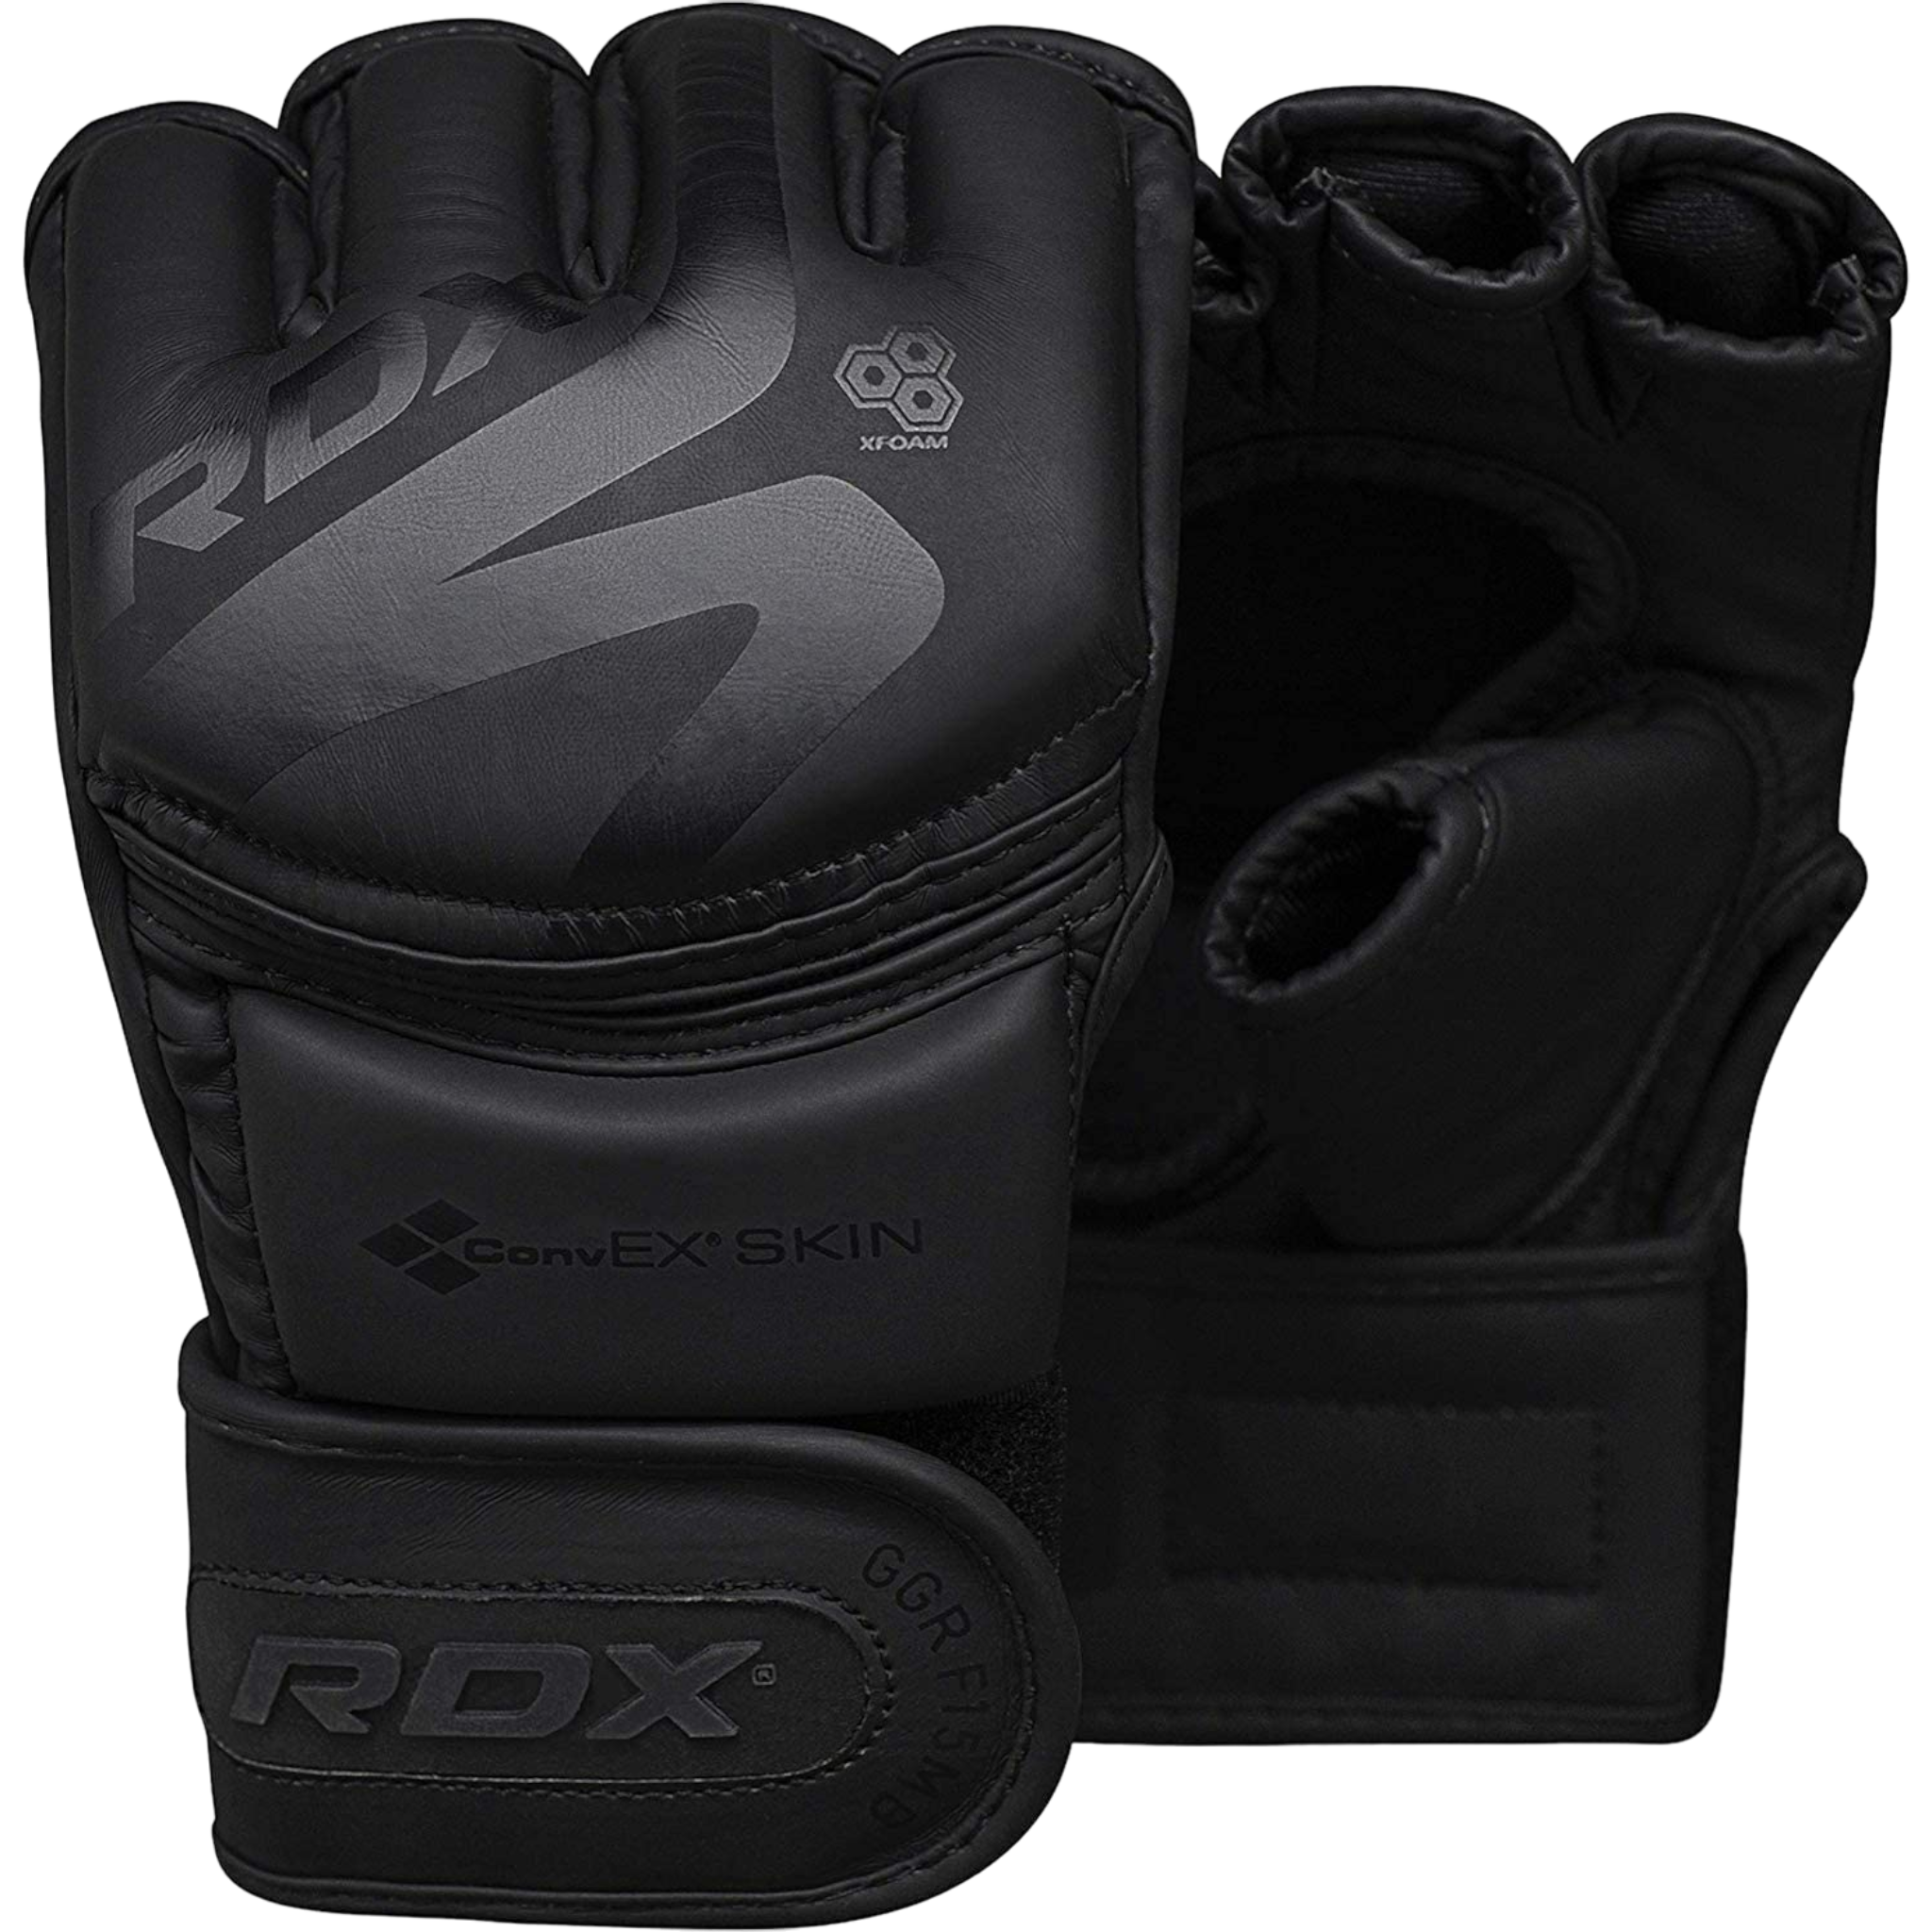 RDX F15 MMA Grappling Gloves Padded Leather Training Sparring Mitts - Matte Black - Pro-Distributing